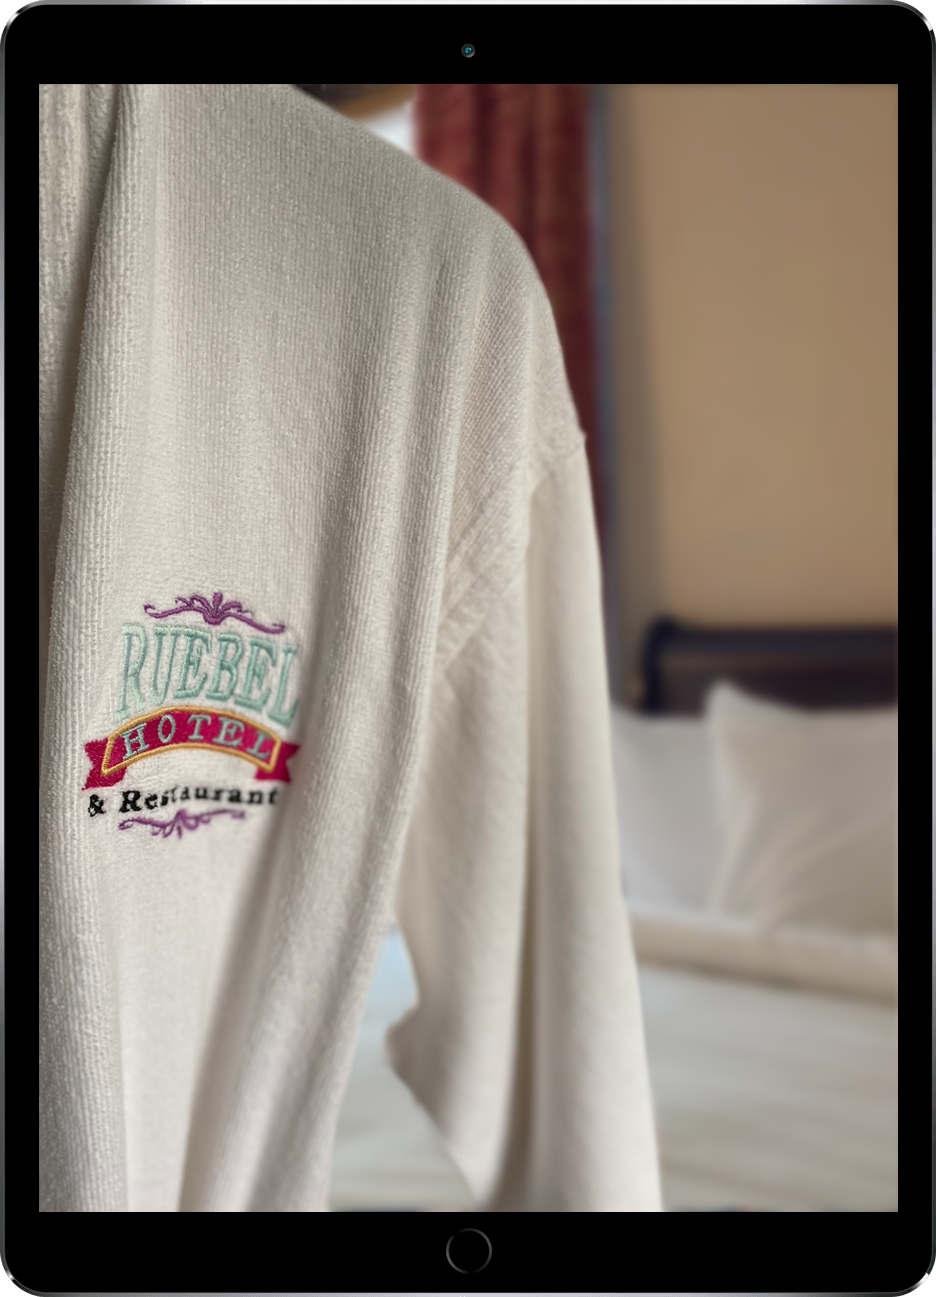 Ipad showing a photograph of a Ruebel Hotel Robe hanging in a room